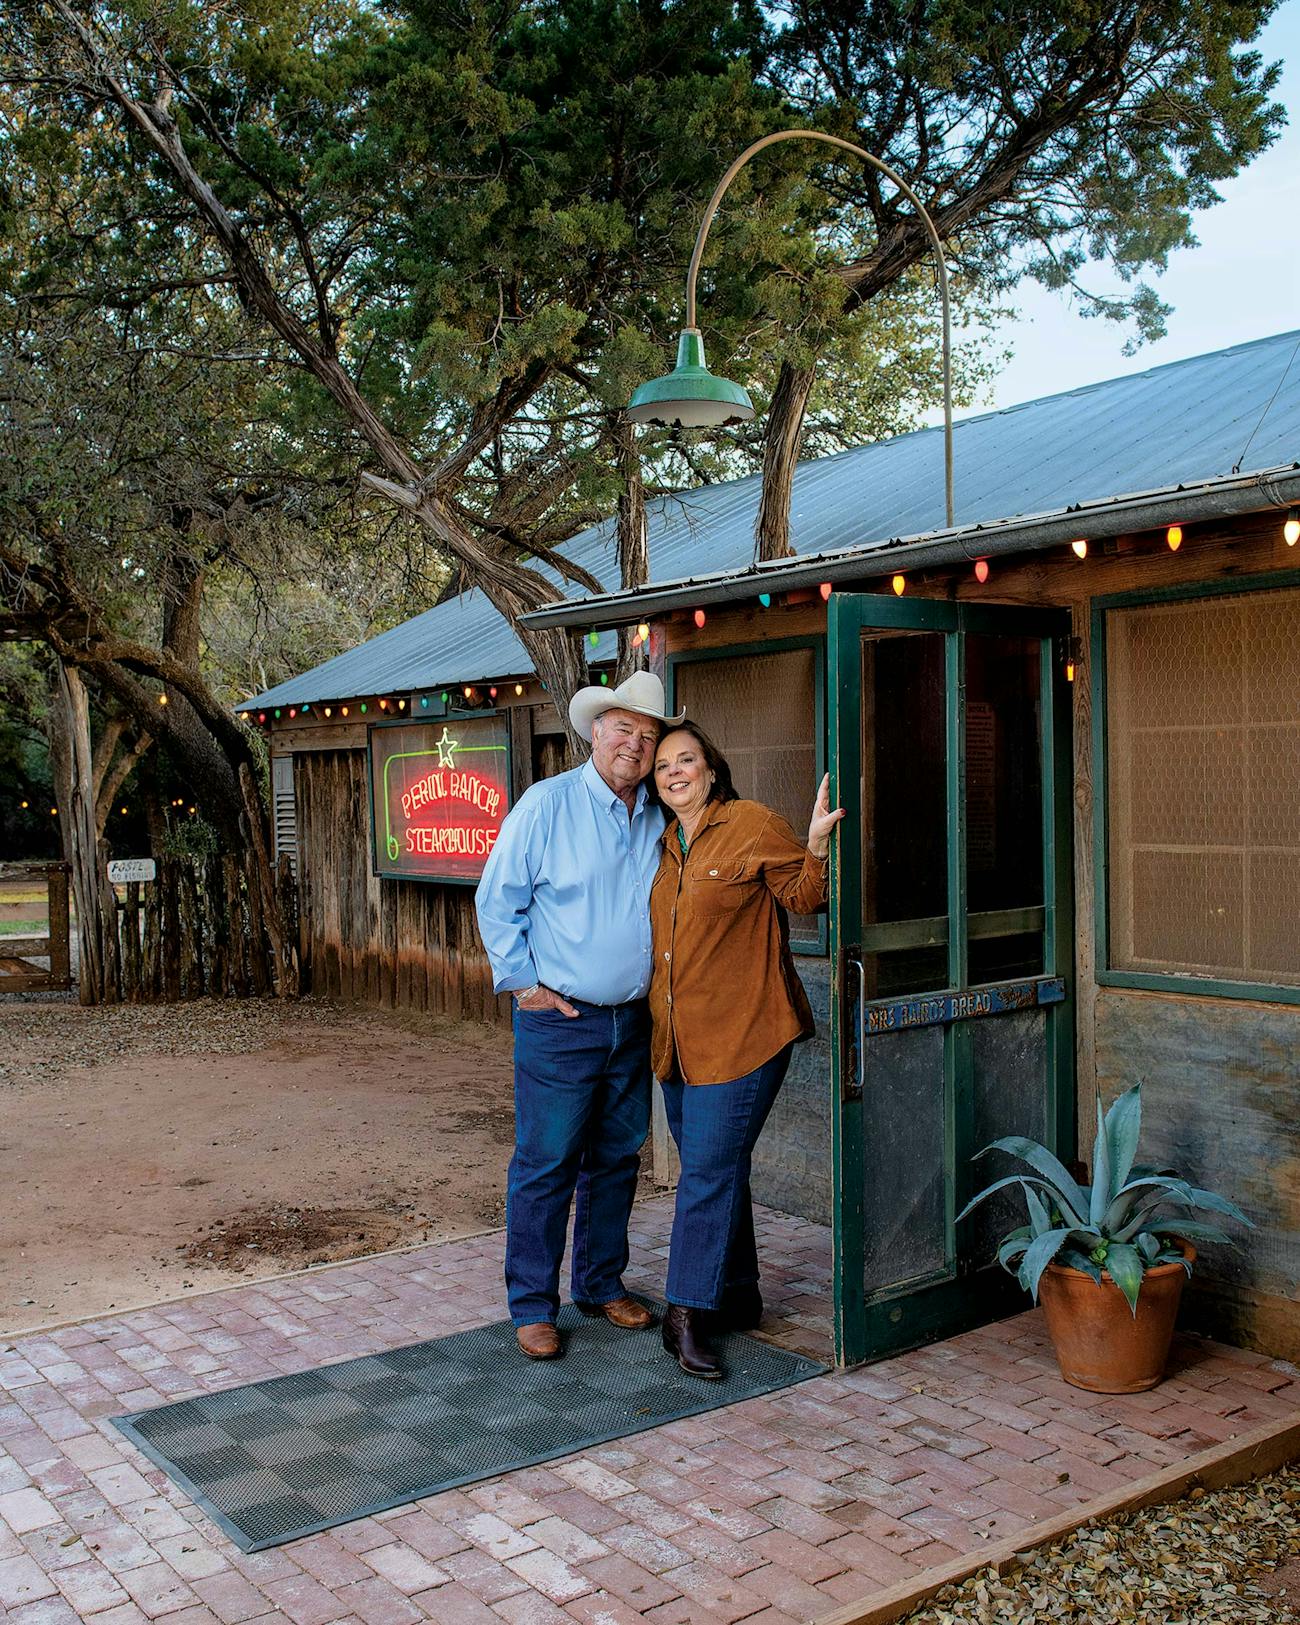 The Best Little Steakhouse in Texas Turns Forty – Texas Monthly